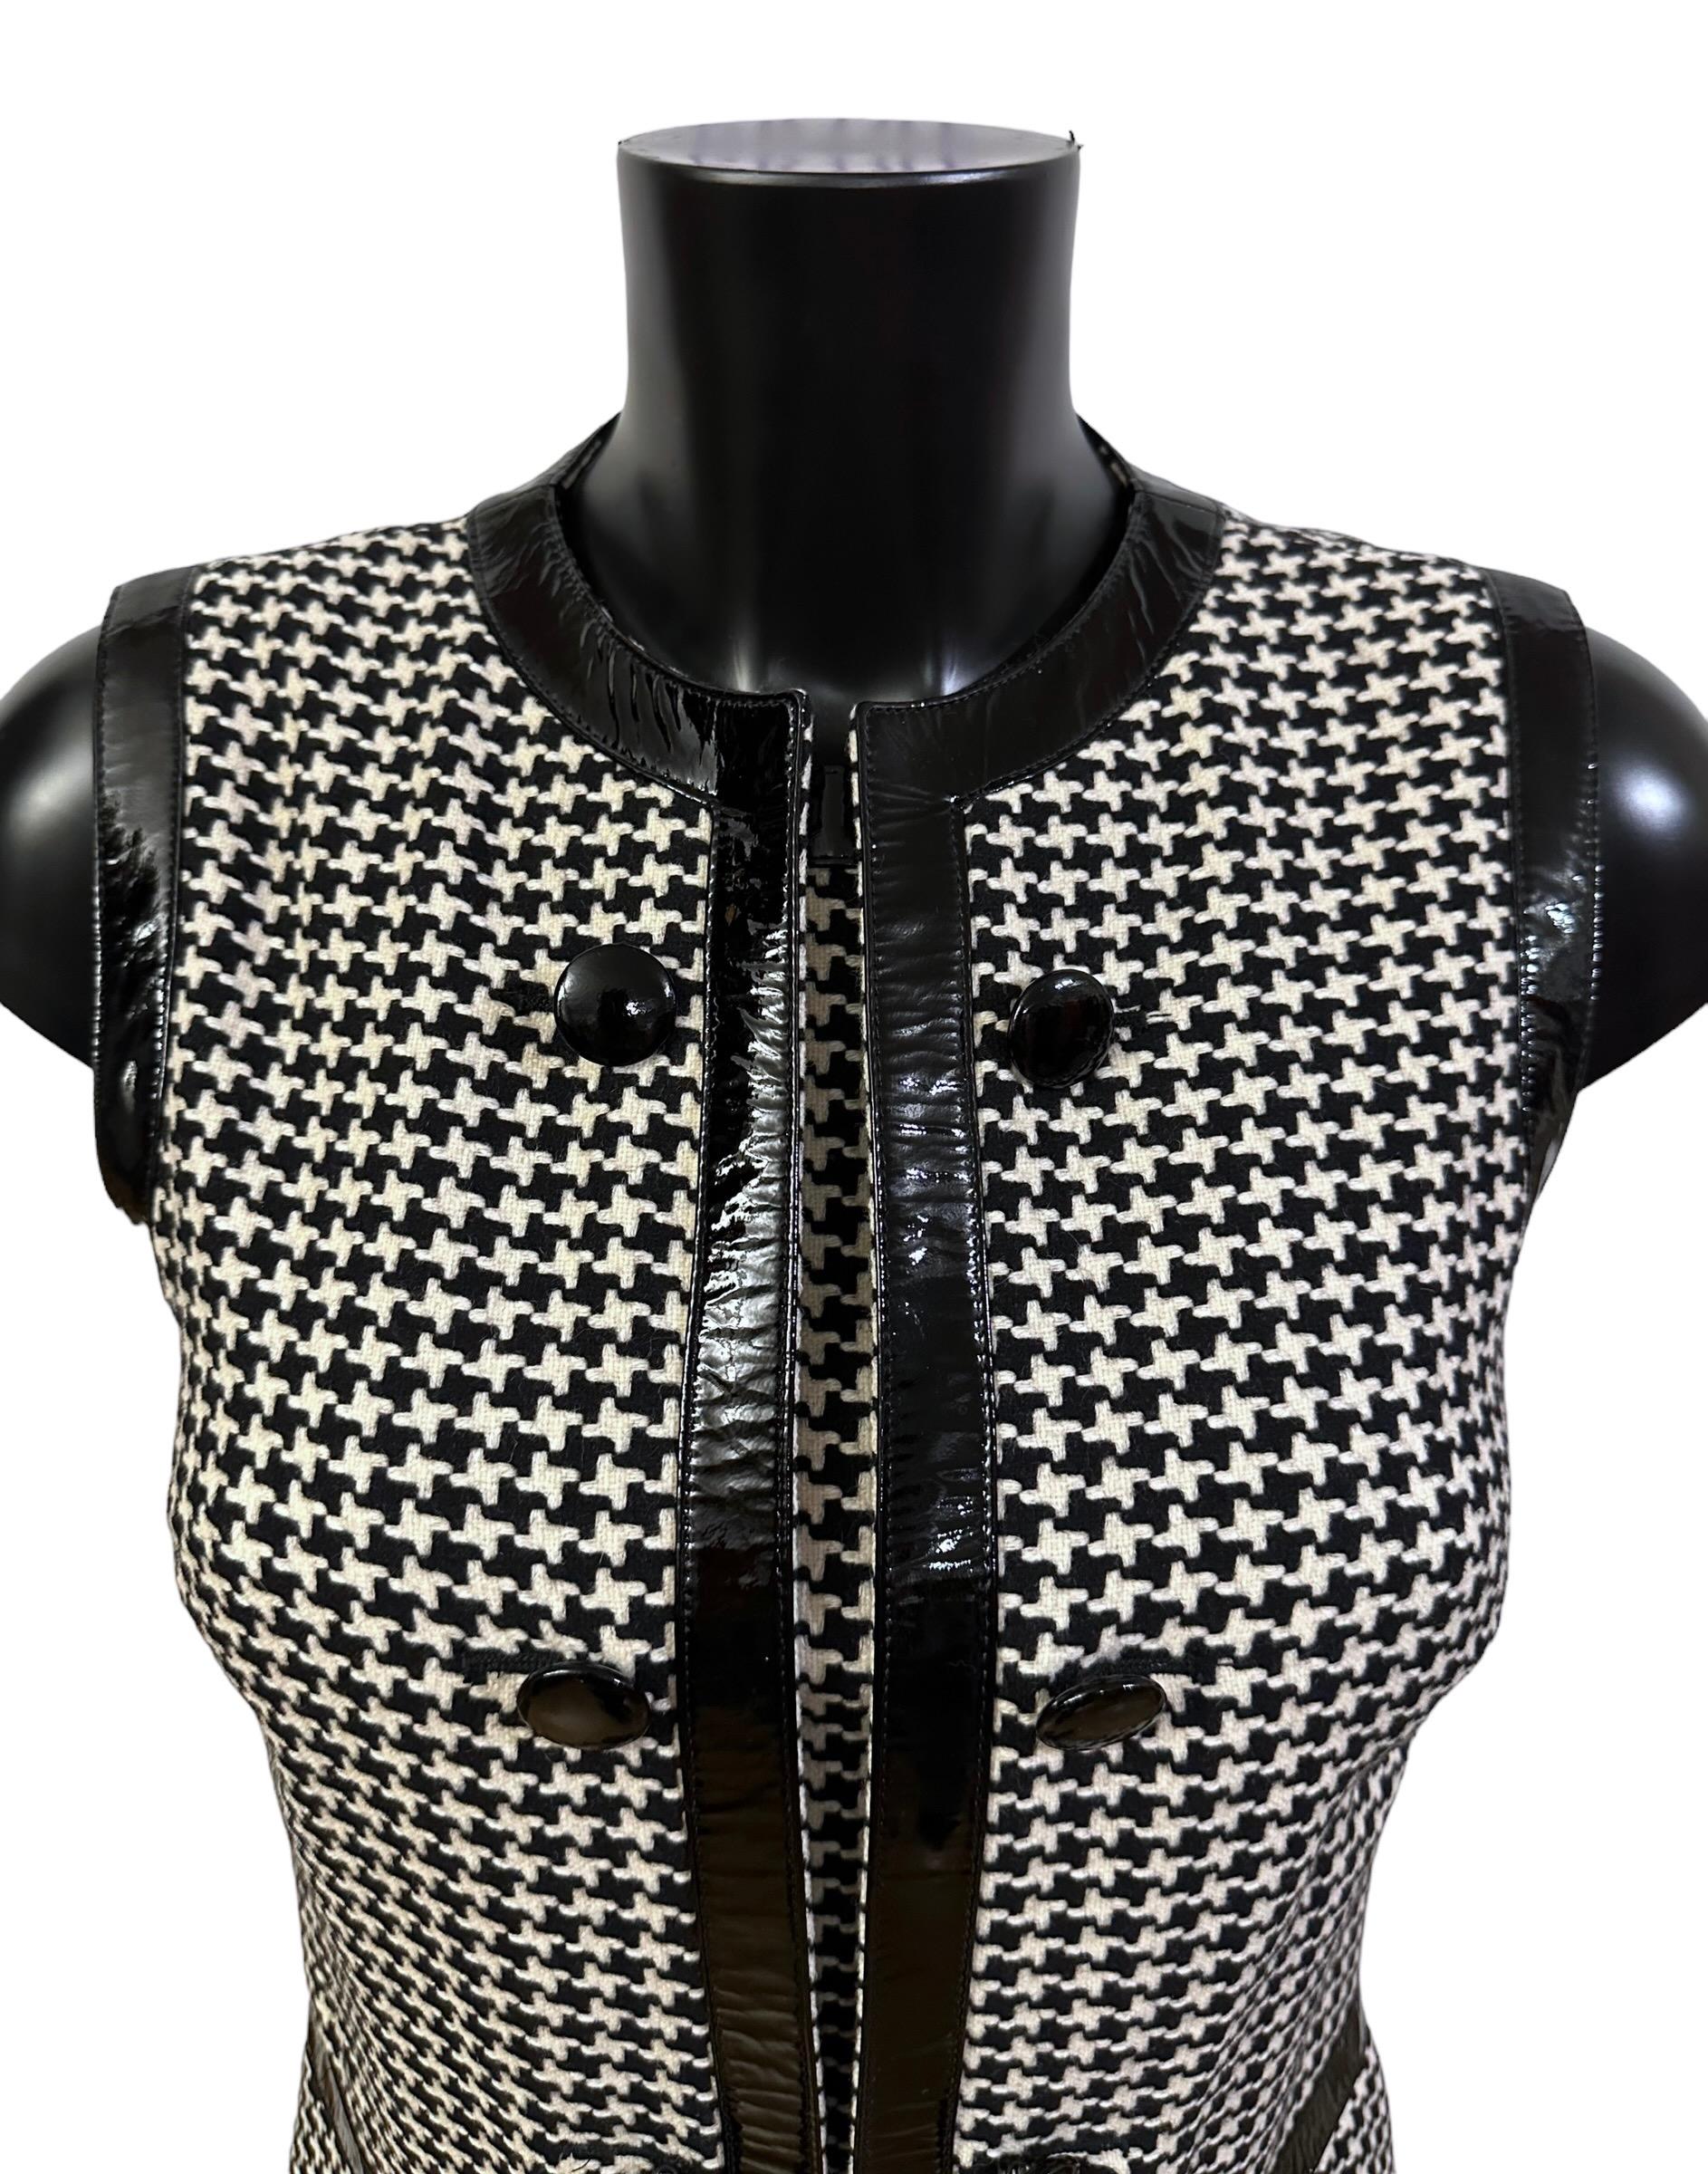 Women's Christian Dior Fall 2008 Black and Off-white Houndstooth Dress by John Galliano For Sale